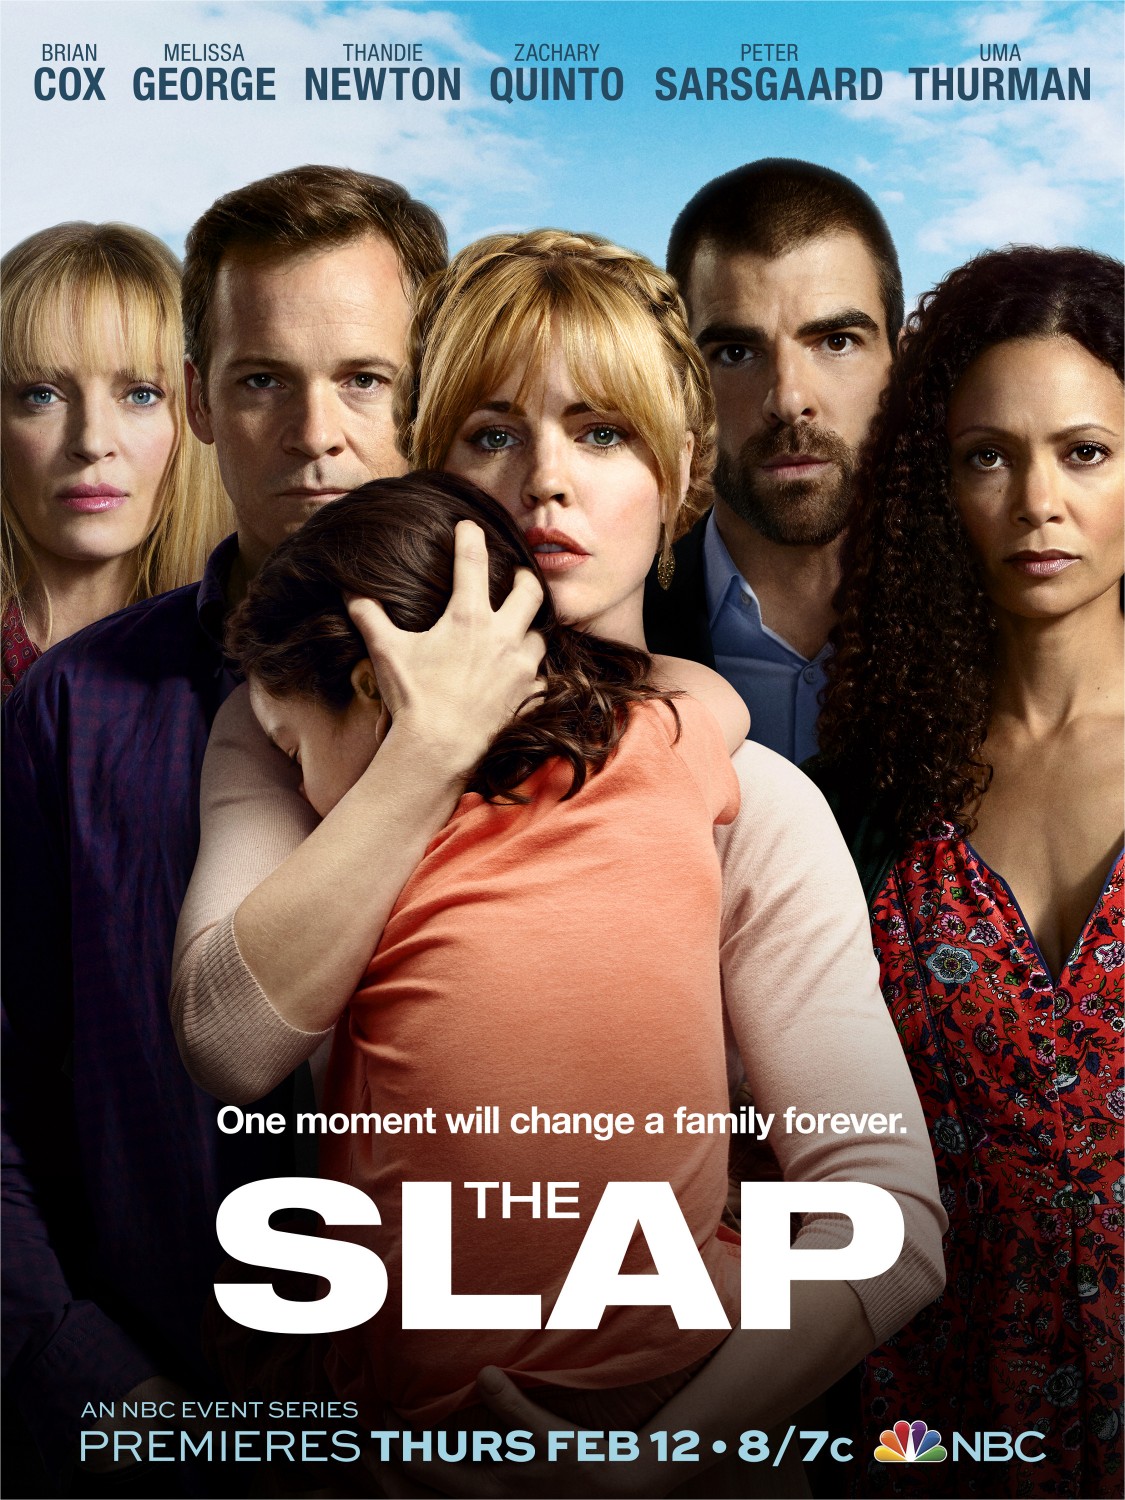 Extra Large TV Poster Image for The Slap 